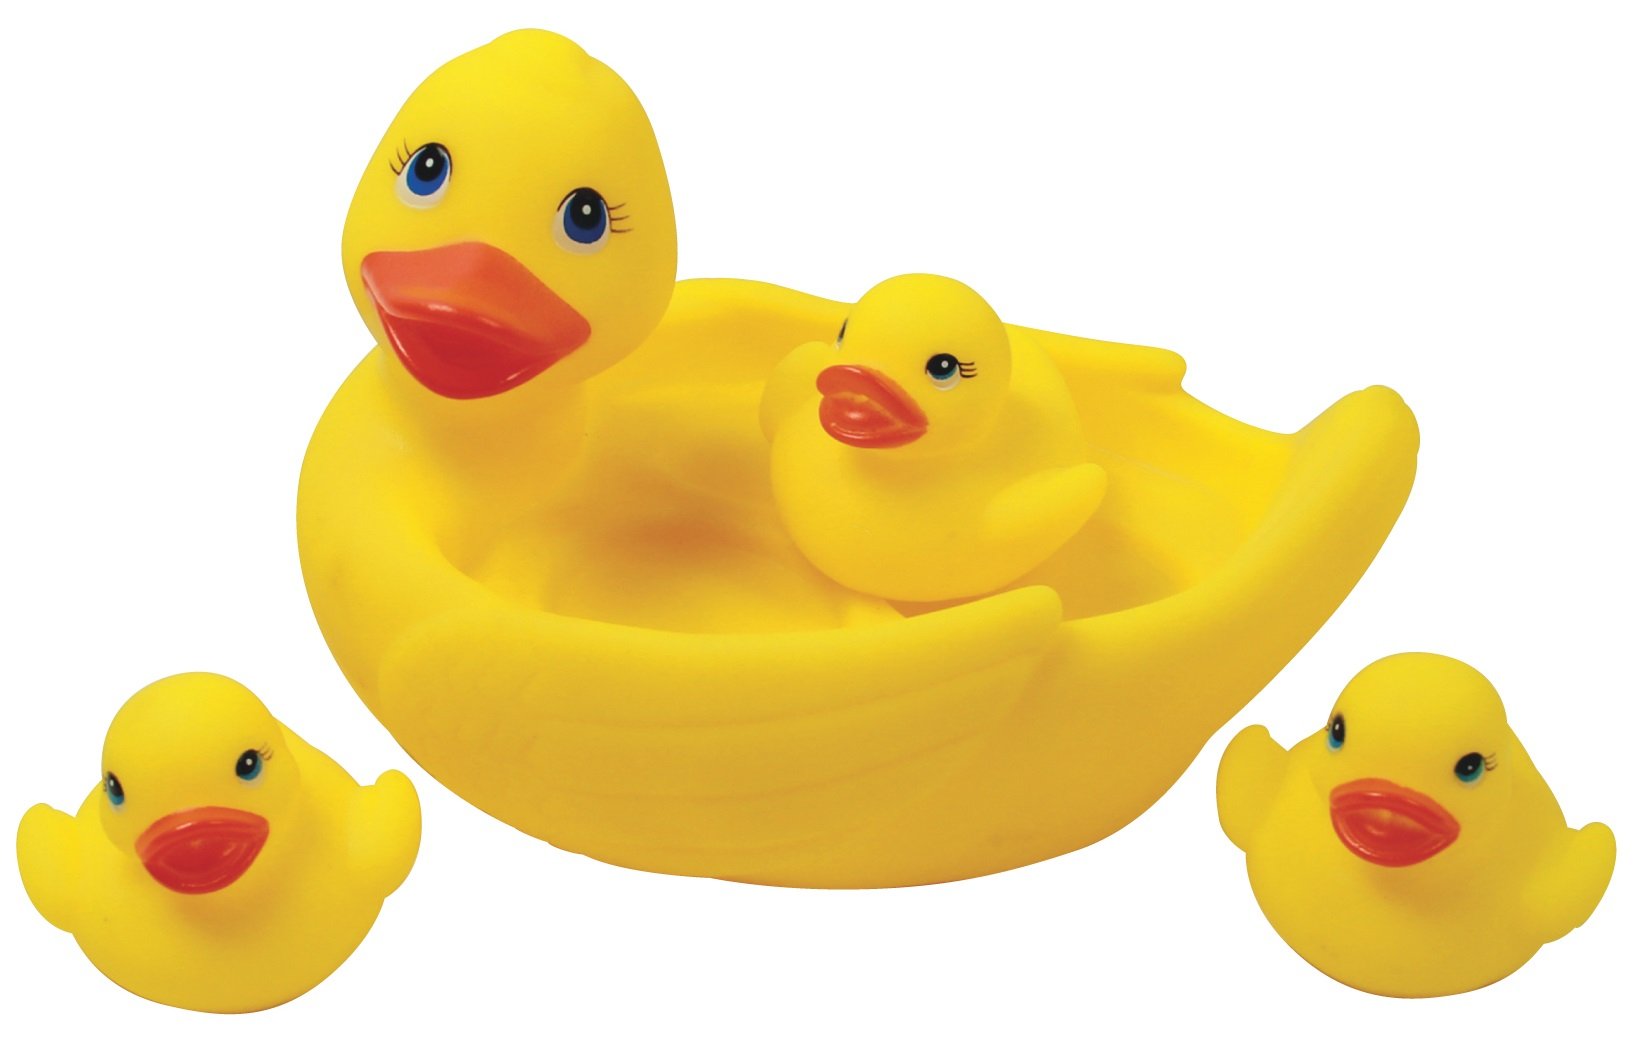 Playmaker Toys Rubber Duck Family Bathtub Toy Pals Also A Great Pet Dog Chew Toy Set